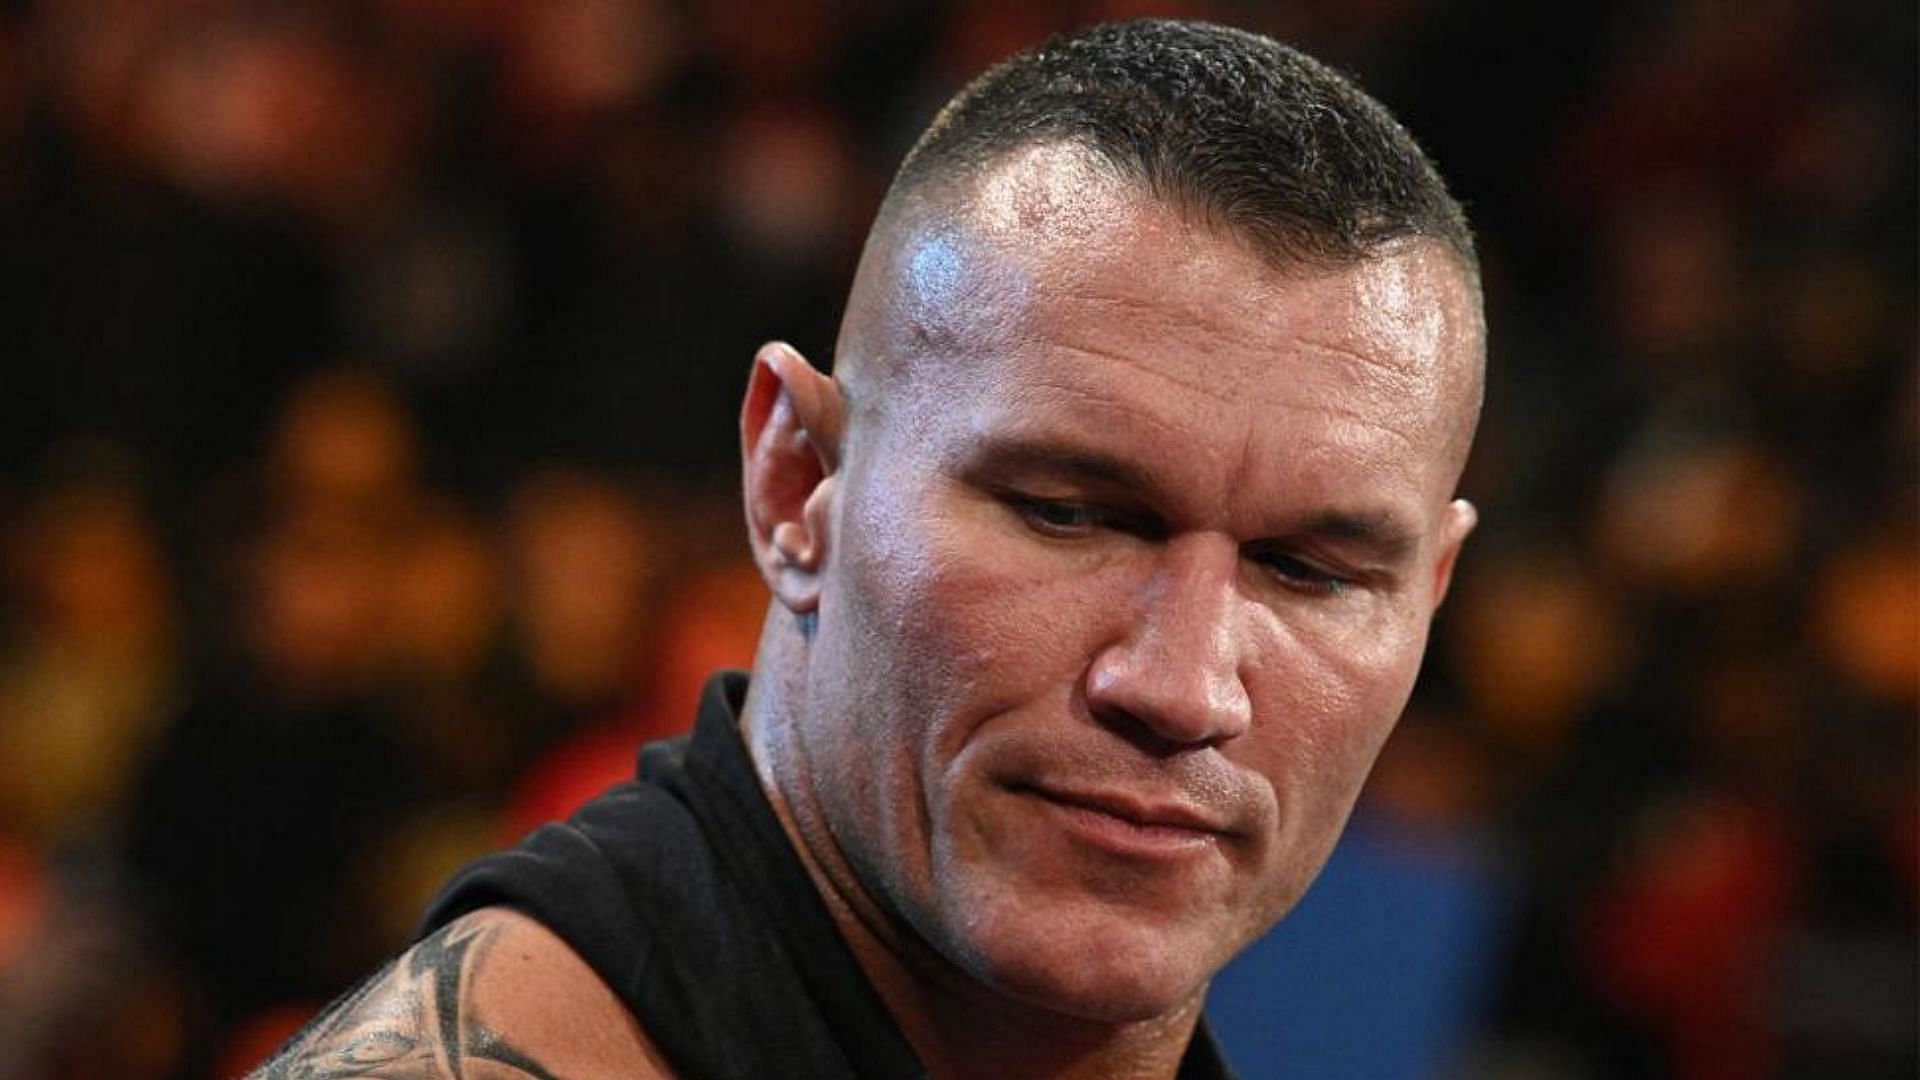 Randy Orton is known for being ruthless as WWE&#039;s legend killer